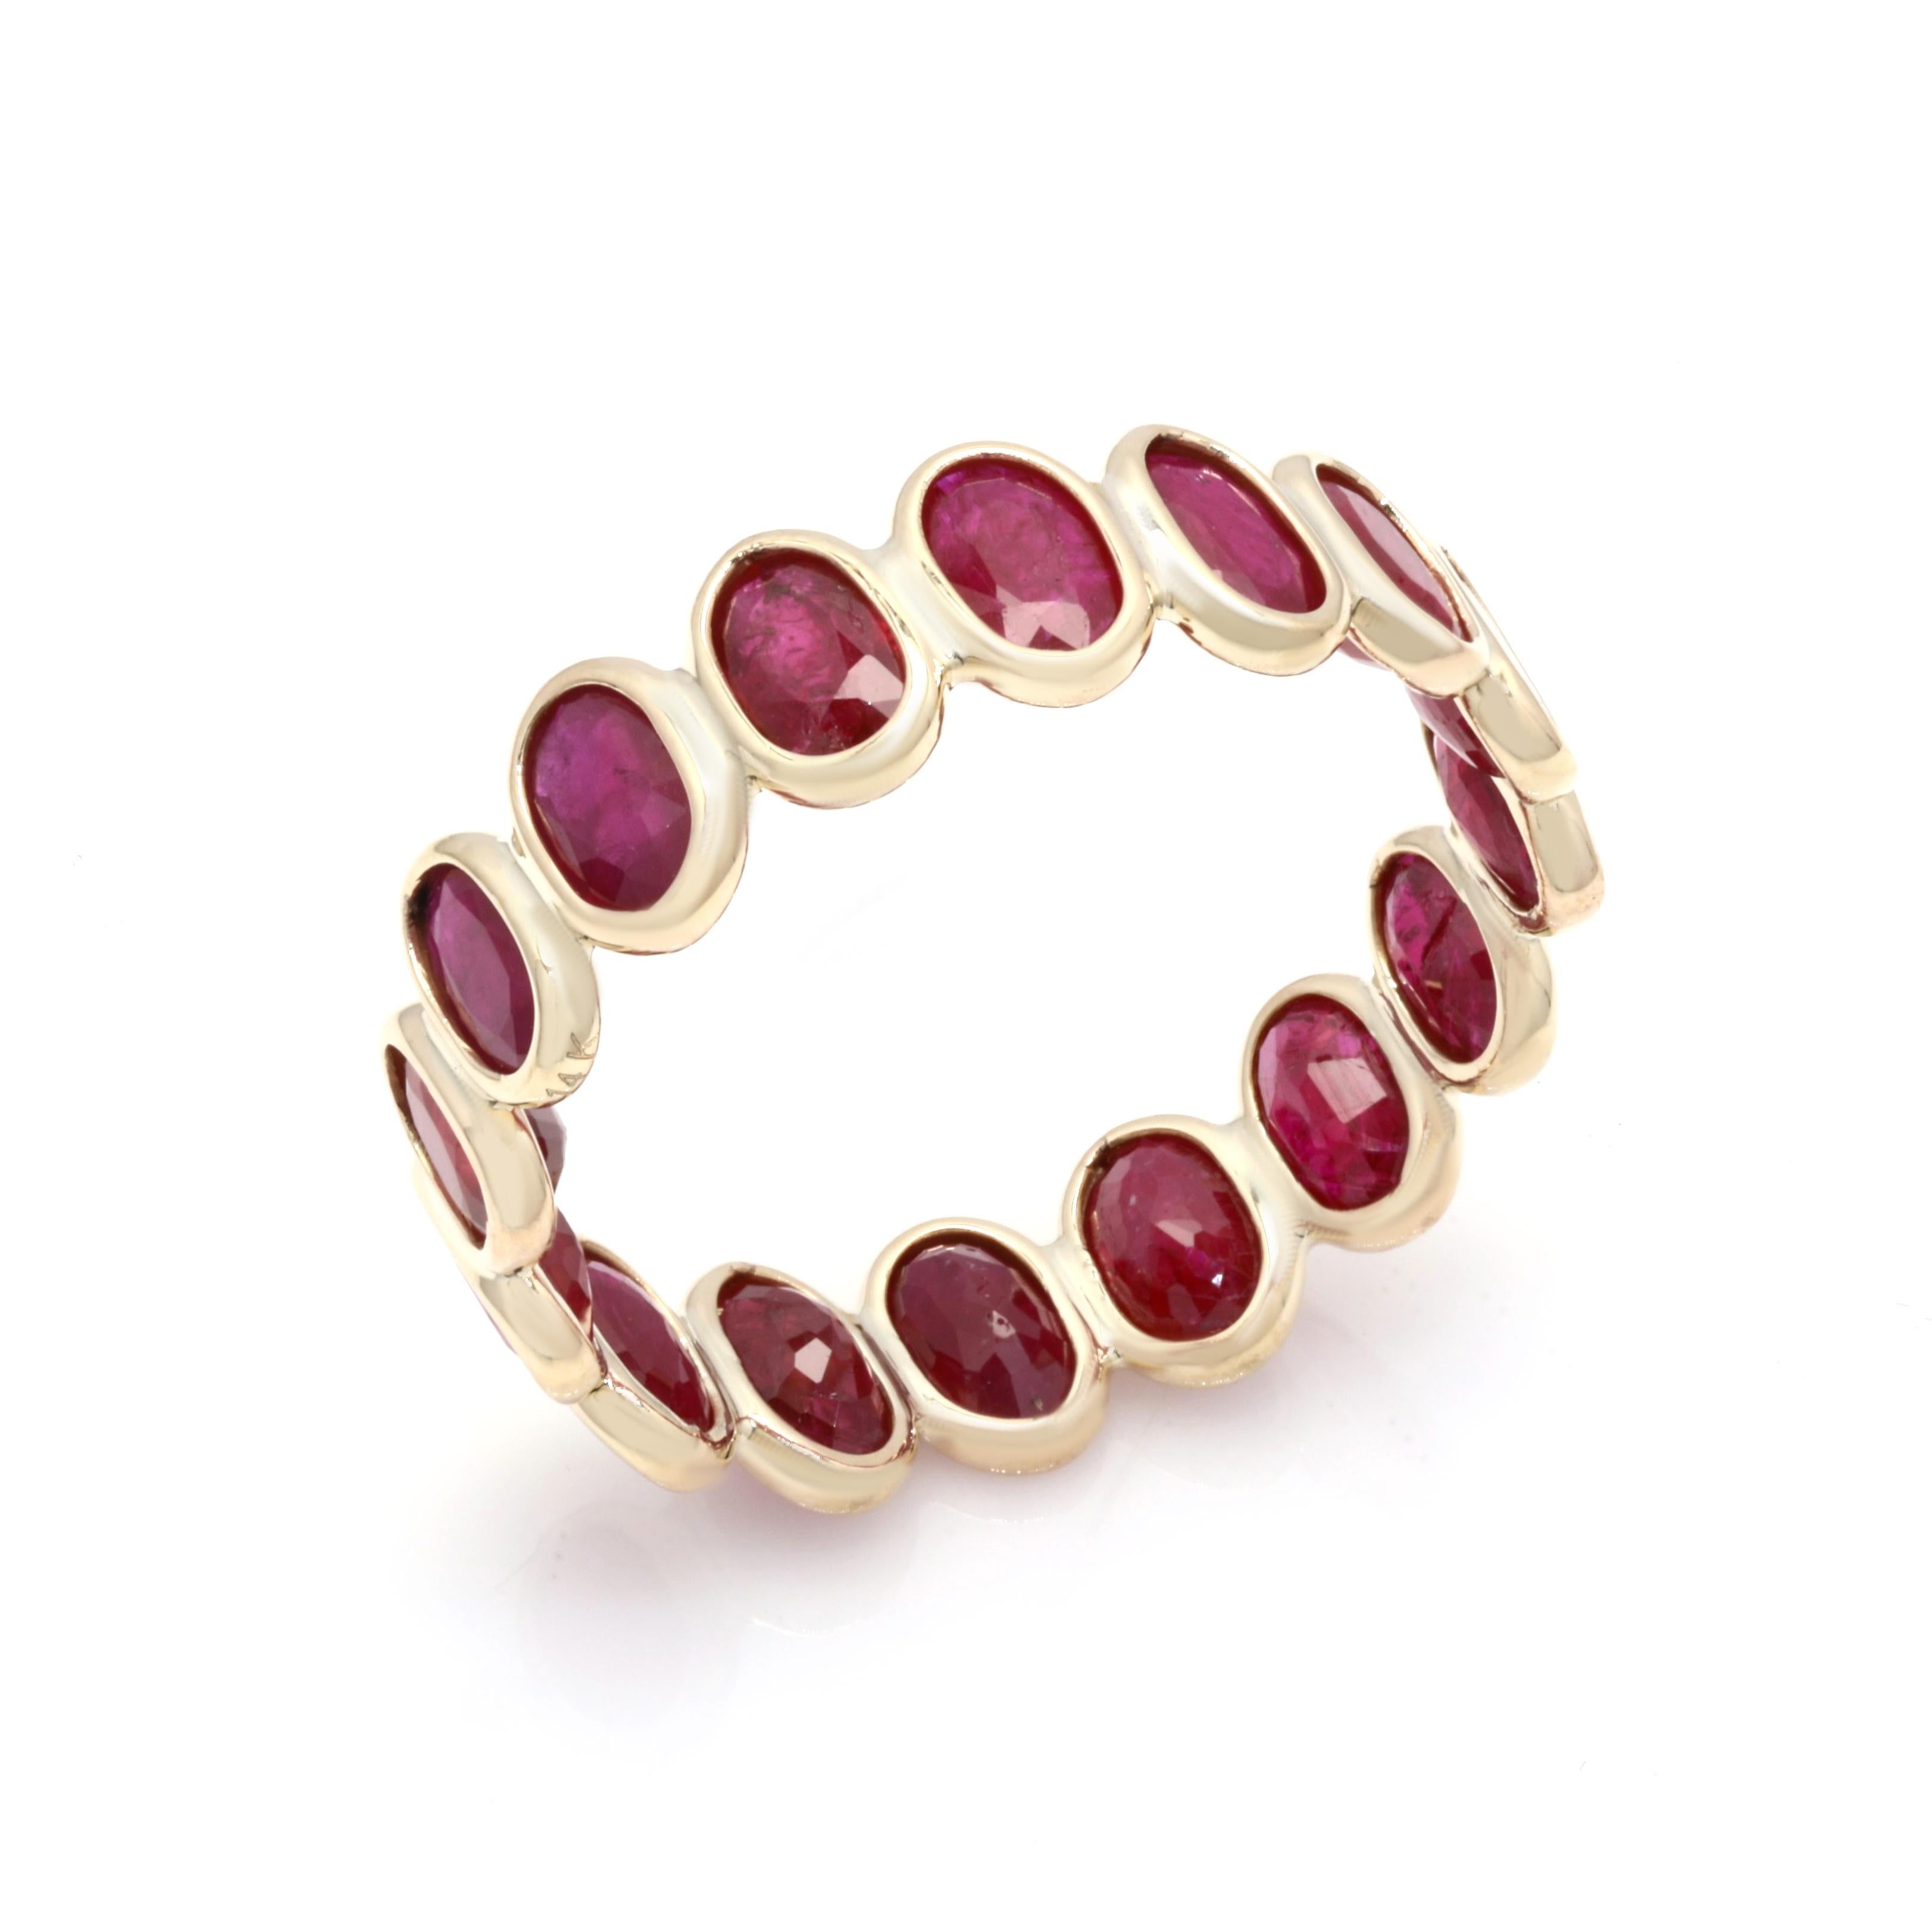 For Sale:  Stackable 4.43 Ct Oval Red Ruby Eternity Band Ring Mounted in 14K Yellow Gold 6